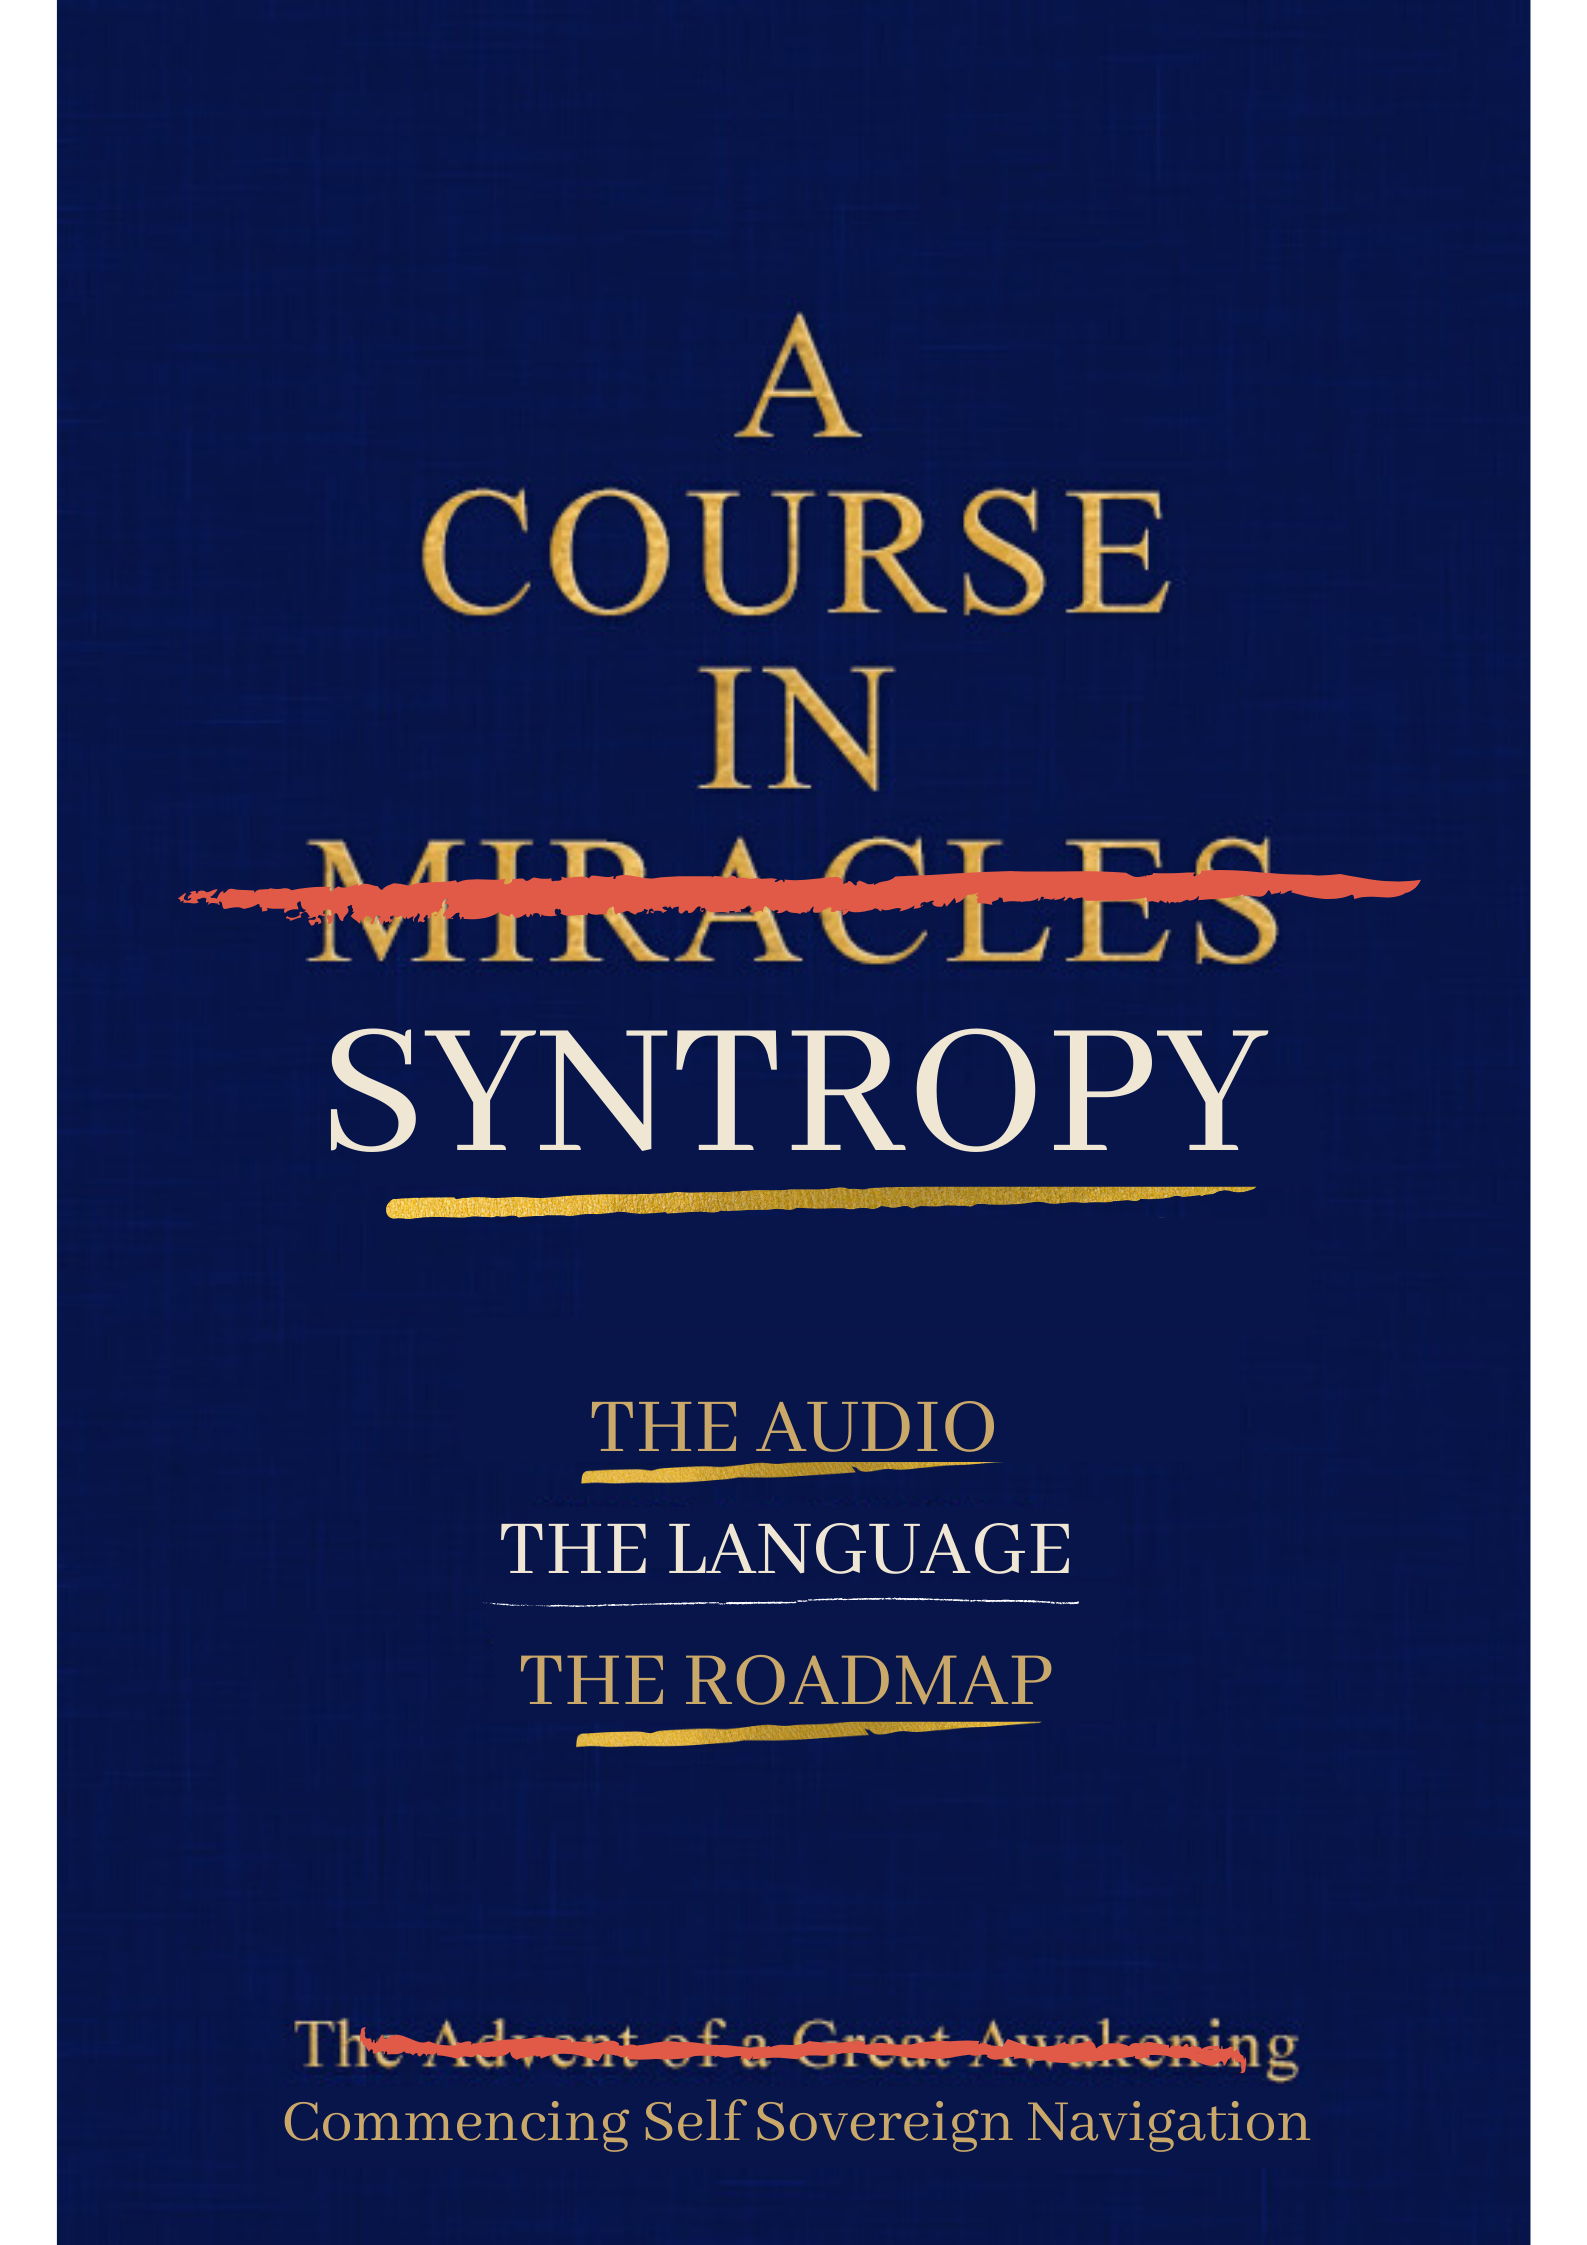 You are invited to a Course in Syntropy